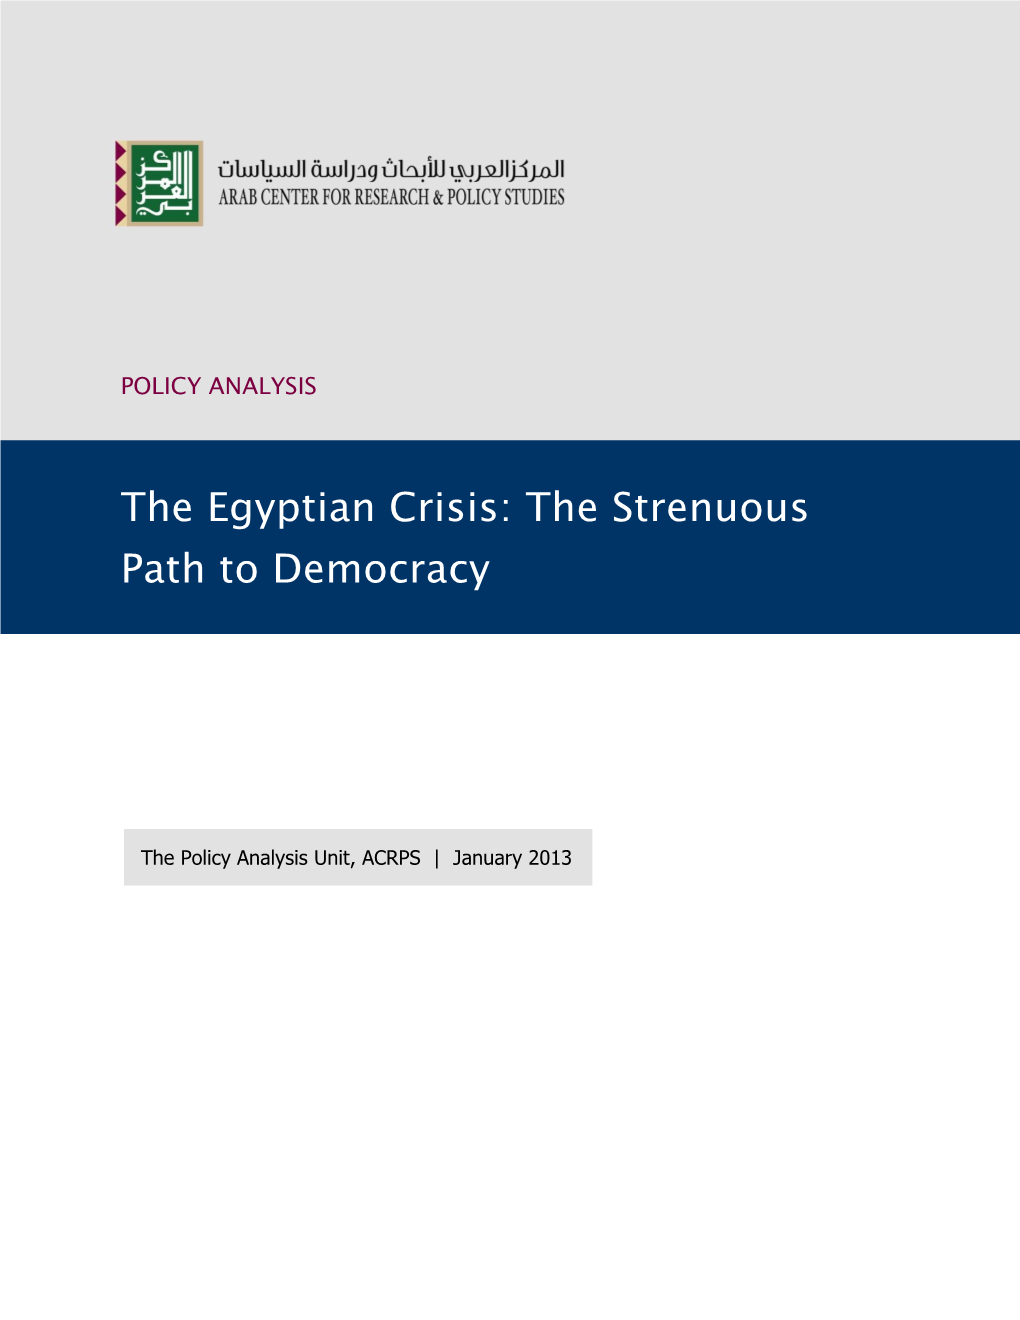 The Egyptian Crisis: the Strenuous Path to Democracy